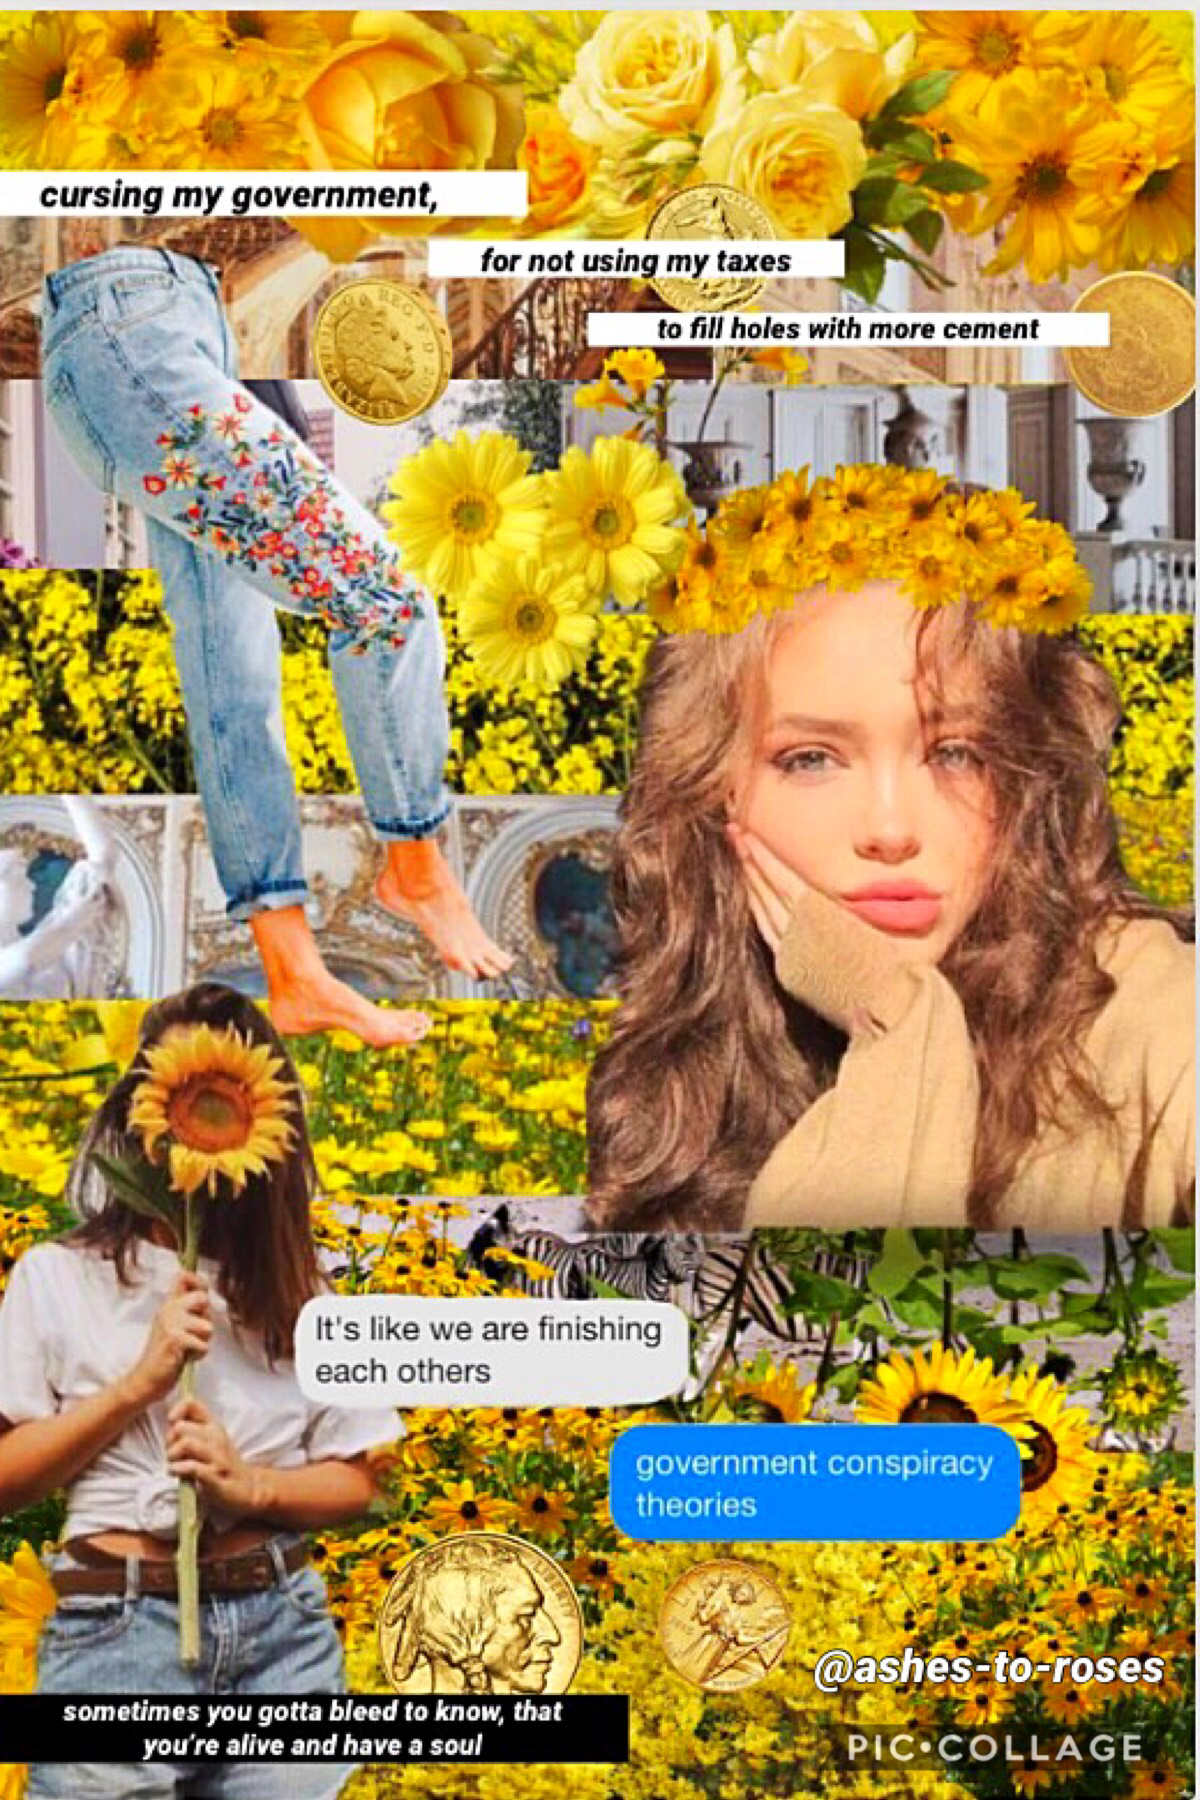 c u r r e n t l y   t a p p i n g?
I’m loving this collage rn! Inspired by @Chandelier_,💜 miss ya!
Remember, you are all worth it, and deserve everything you work for. And as my awesome PC bro says, keep thriving!💓 LOVE YA GURL💜